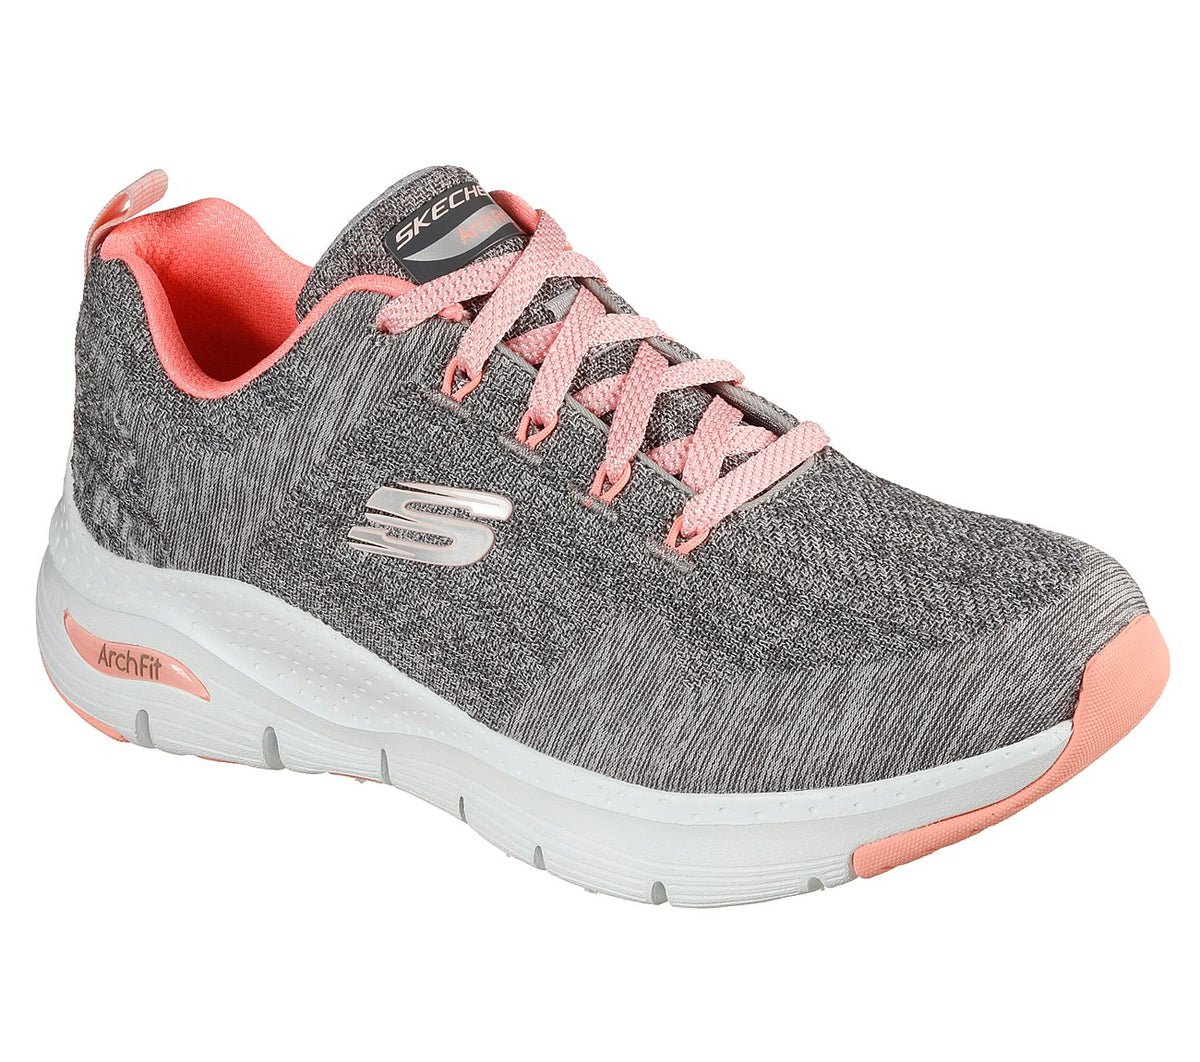 Skechers Women Arch Fit Shoes - 149414-GYPK - Warong